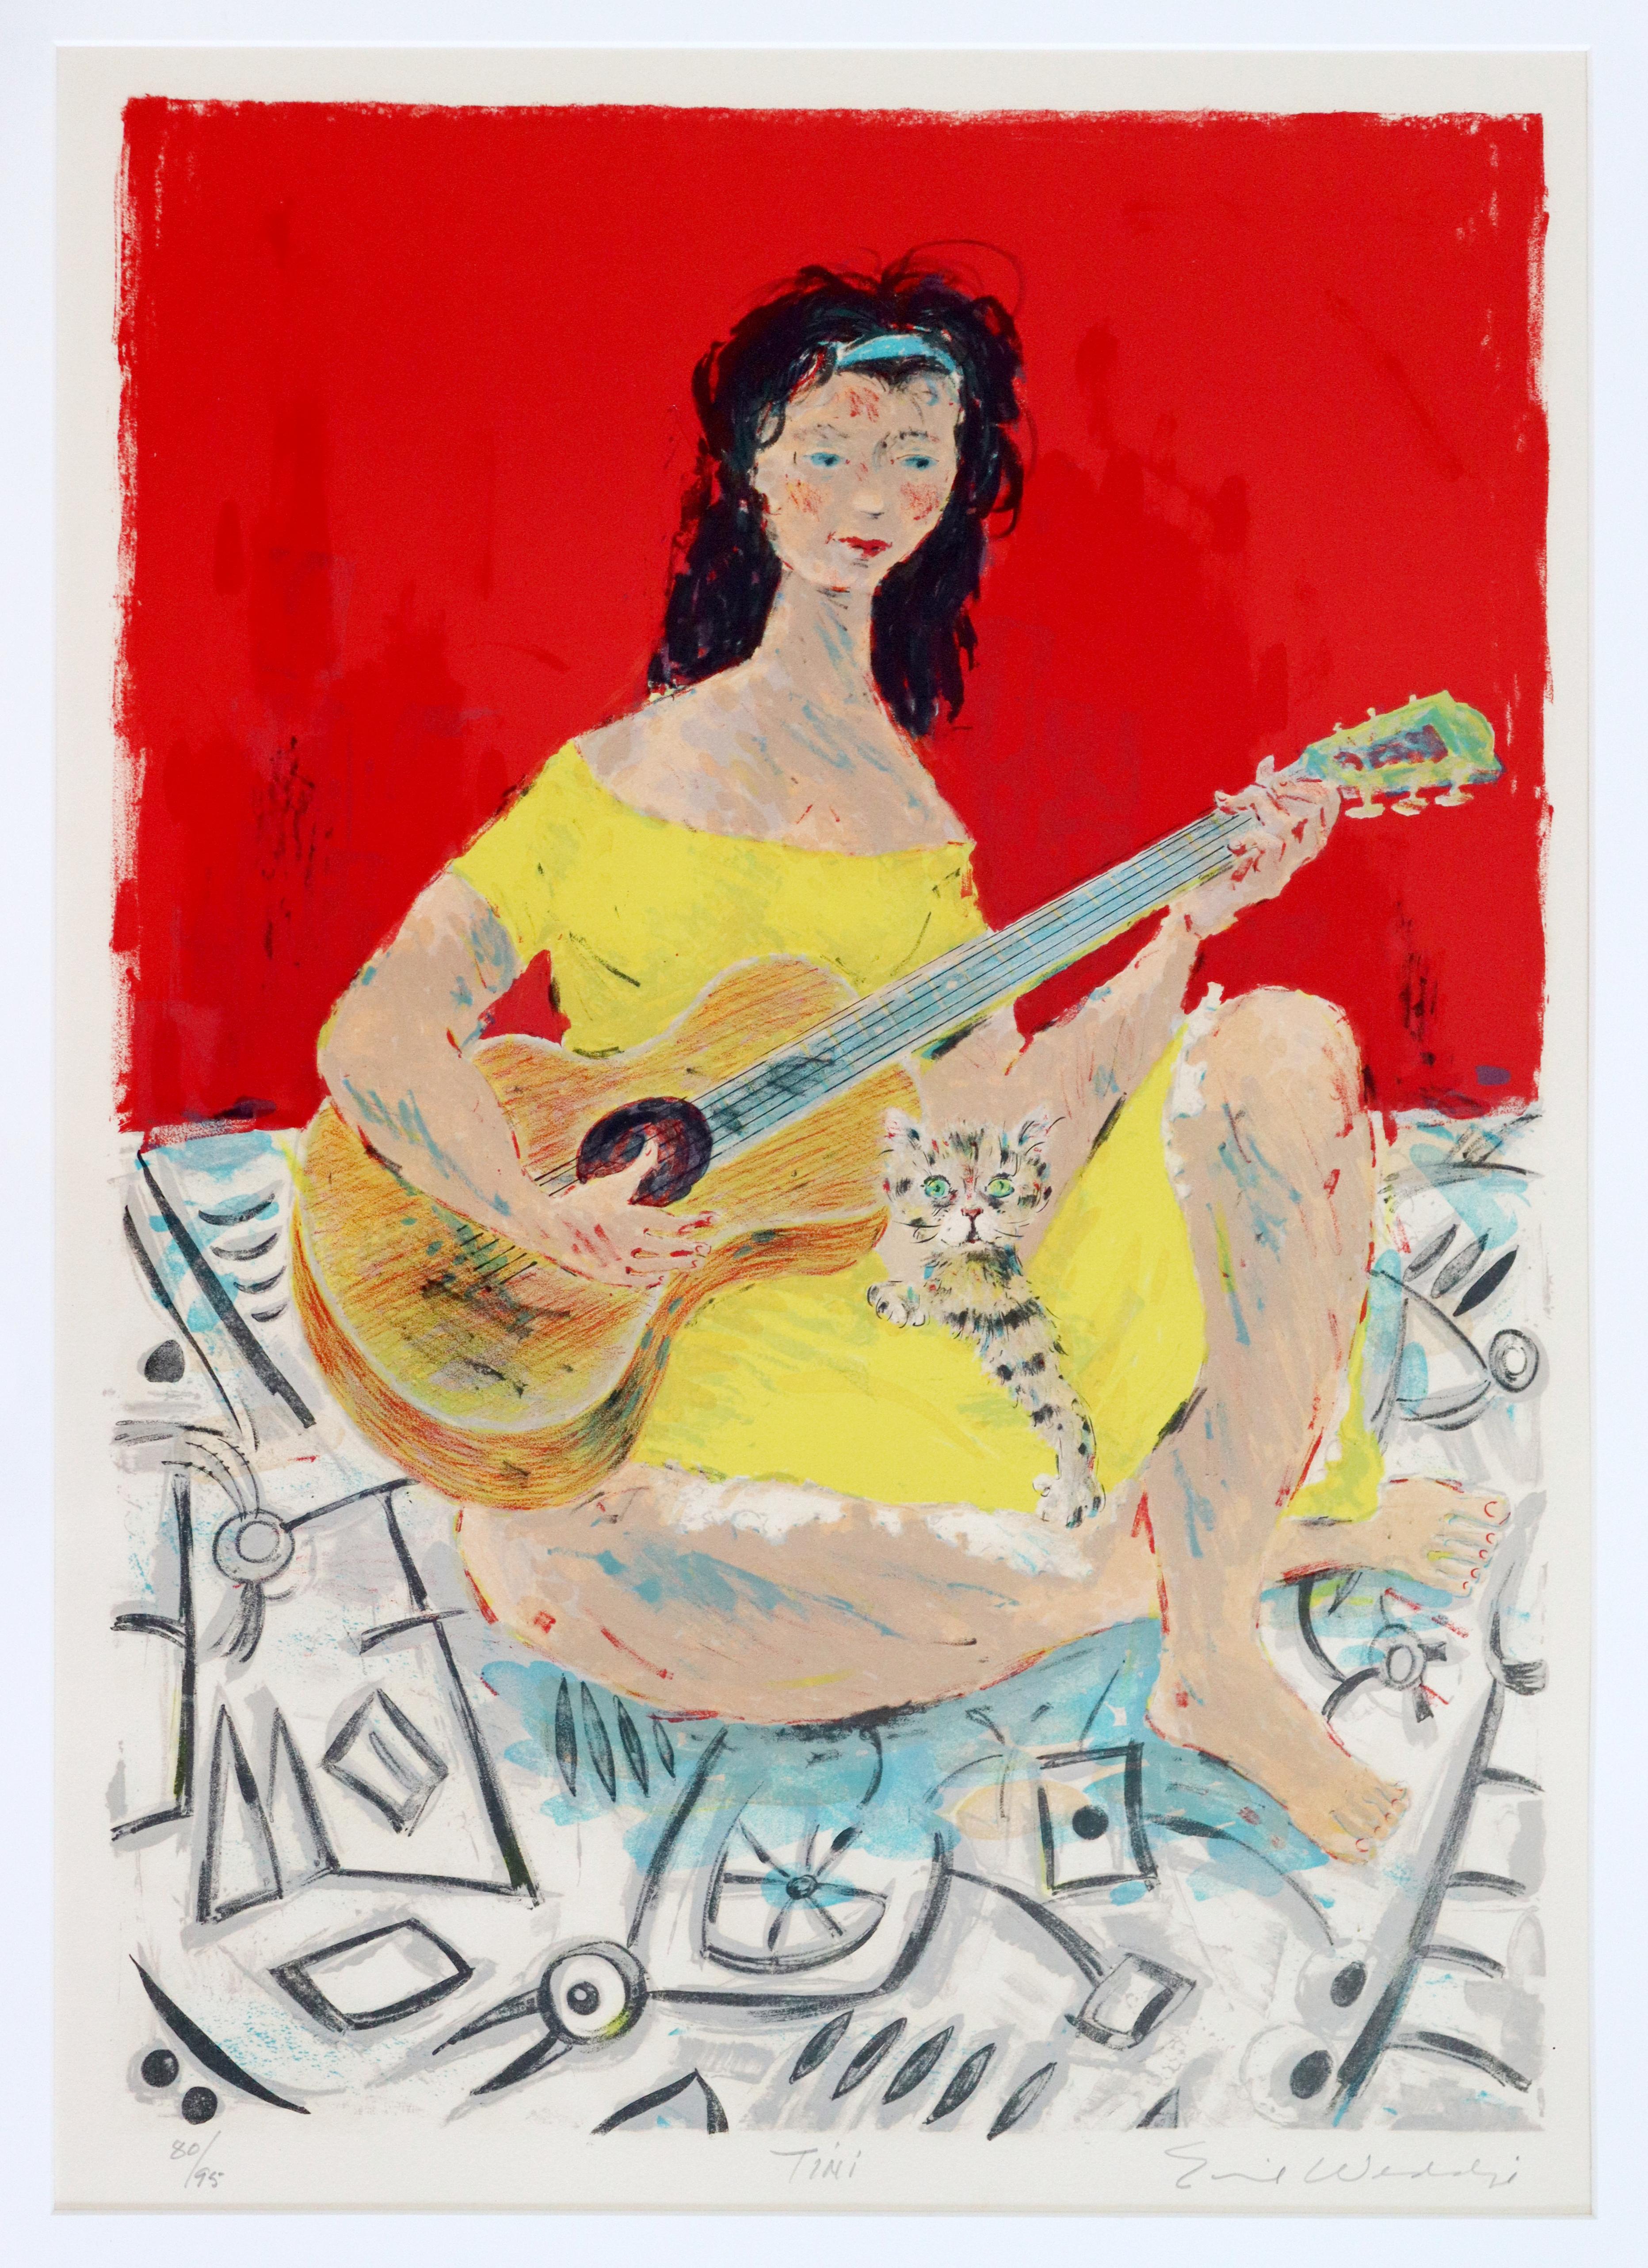 For your consideration is a framed lithograph of a woman playing the guitar with a cat, signed by Eddie Weddige, numbered 80/95. Piece is in excellent condition, but the matte has water damage. The dimensions of the frame are 25